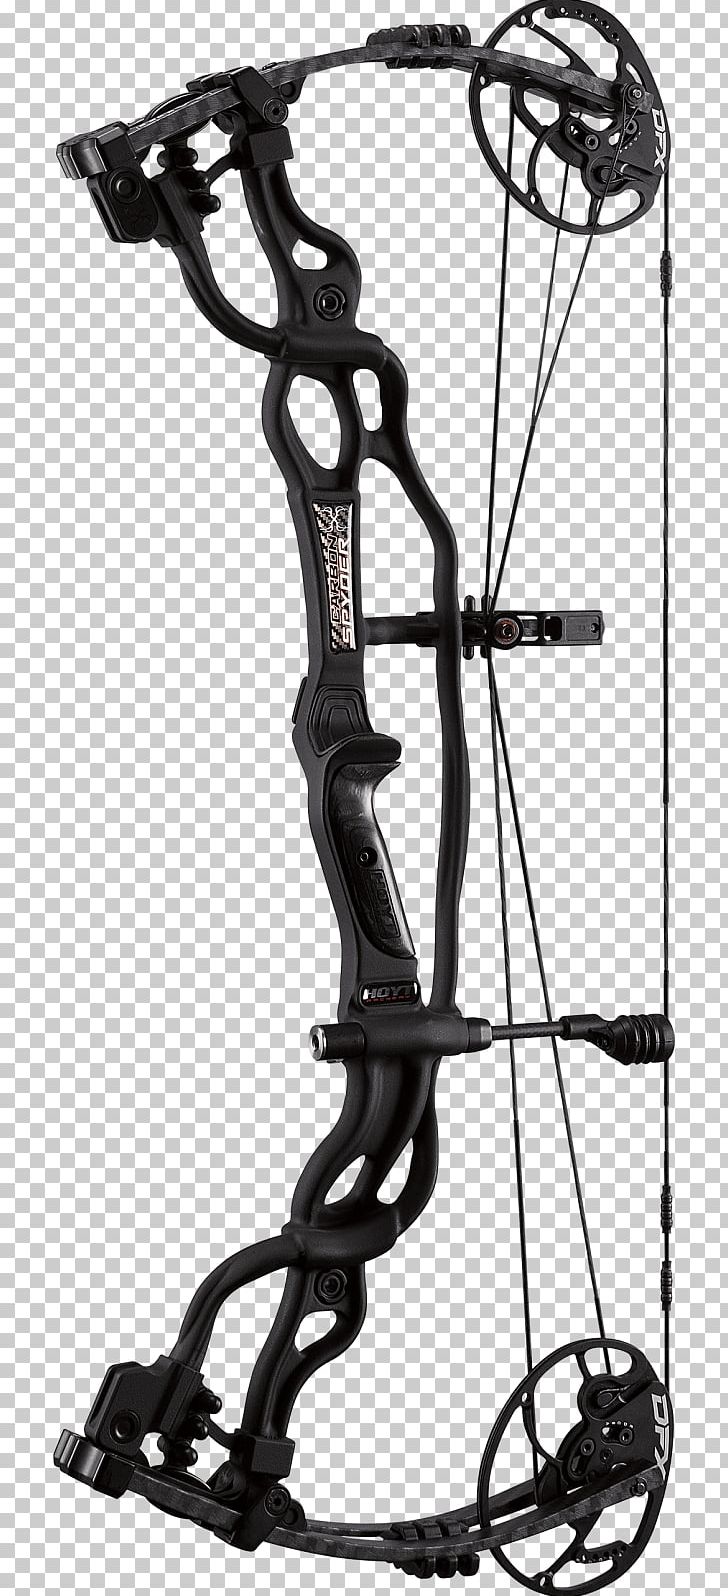 Hoyt Archery Bow And Arrow Carbon Hunting PNG, Clipart, Archery, Auto Part, Black, Black And White, Bow And Arrow Free PNG Download